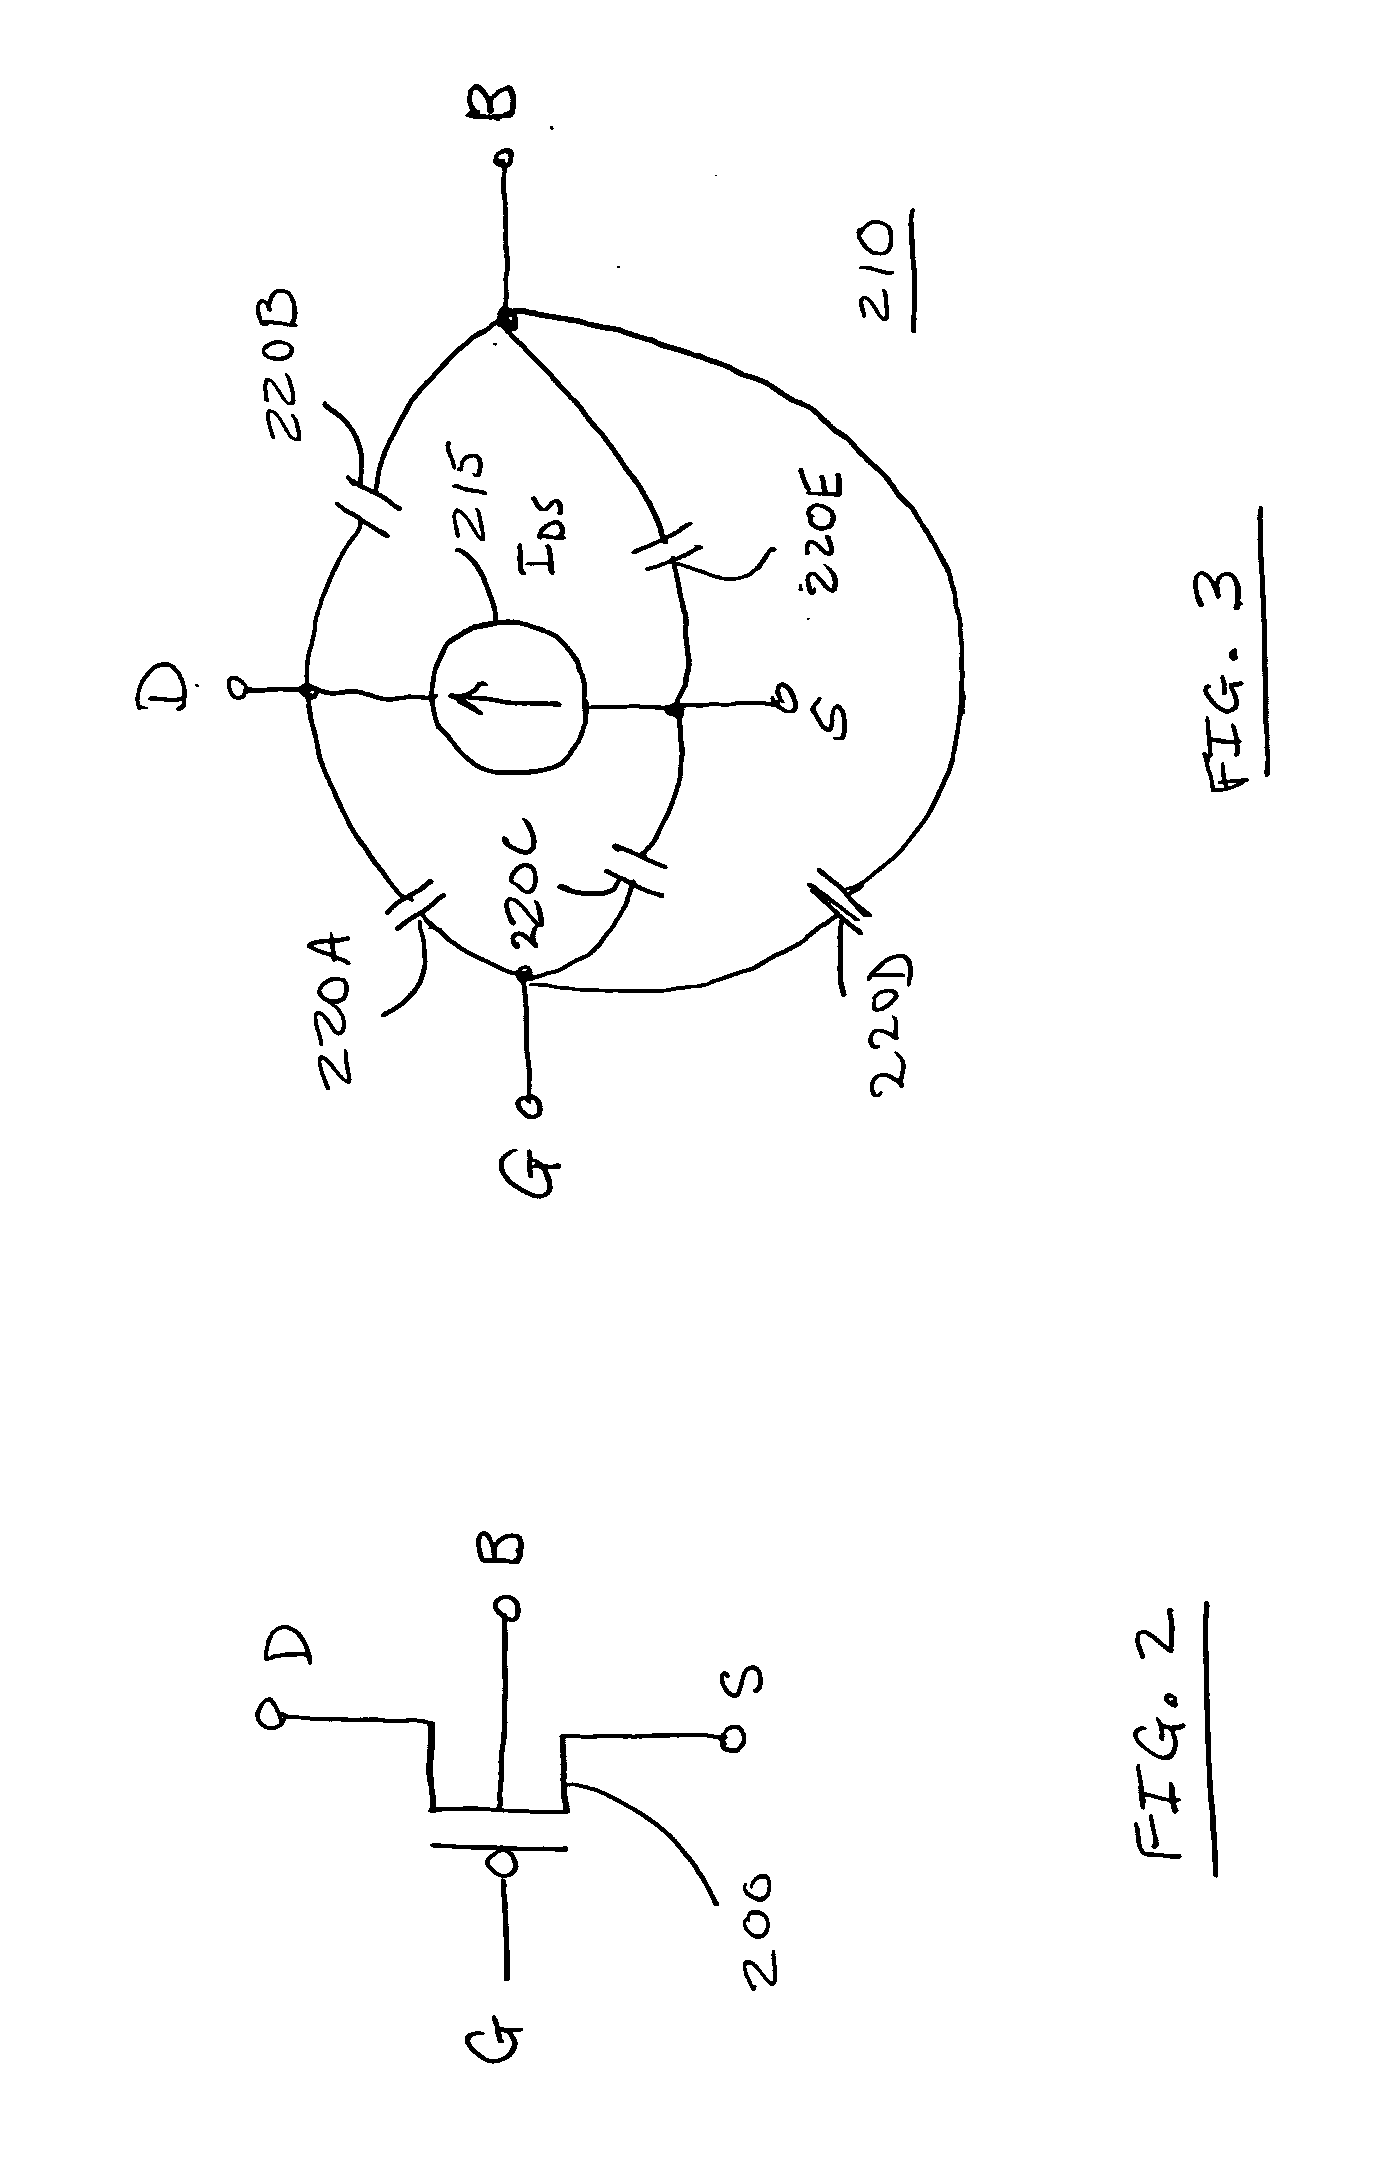 Apparatus and methods for simulation of electronic circuitry